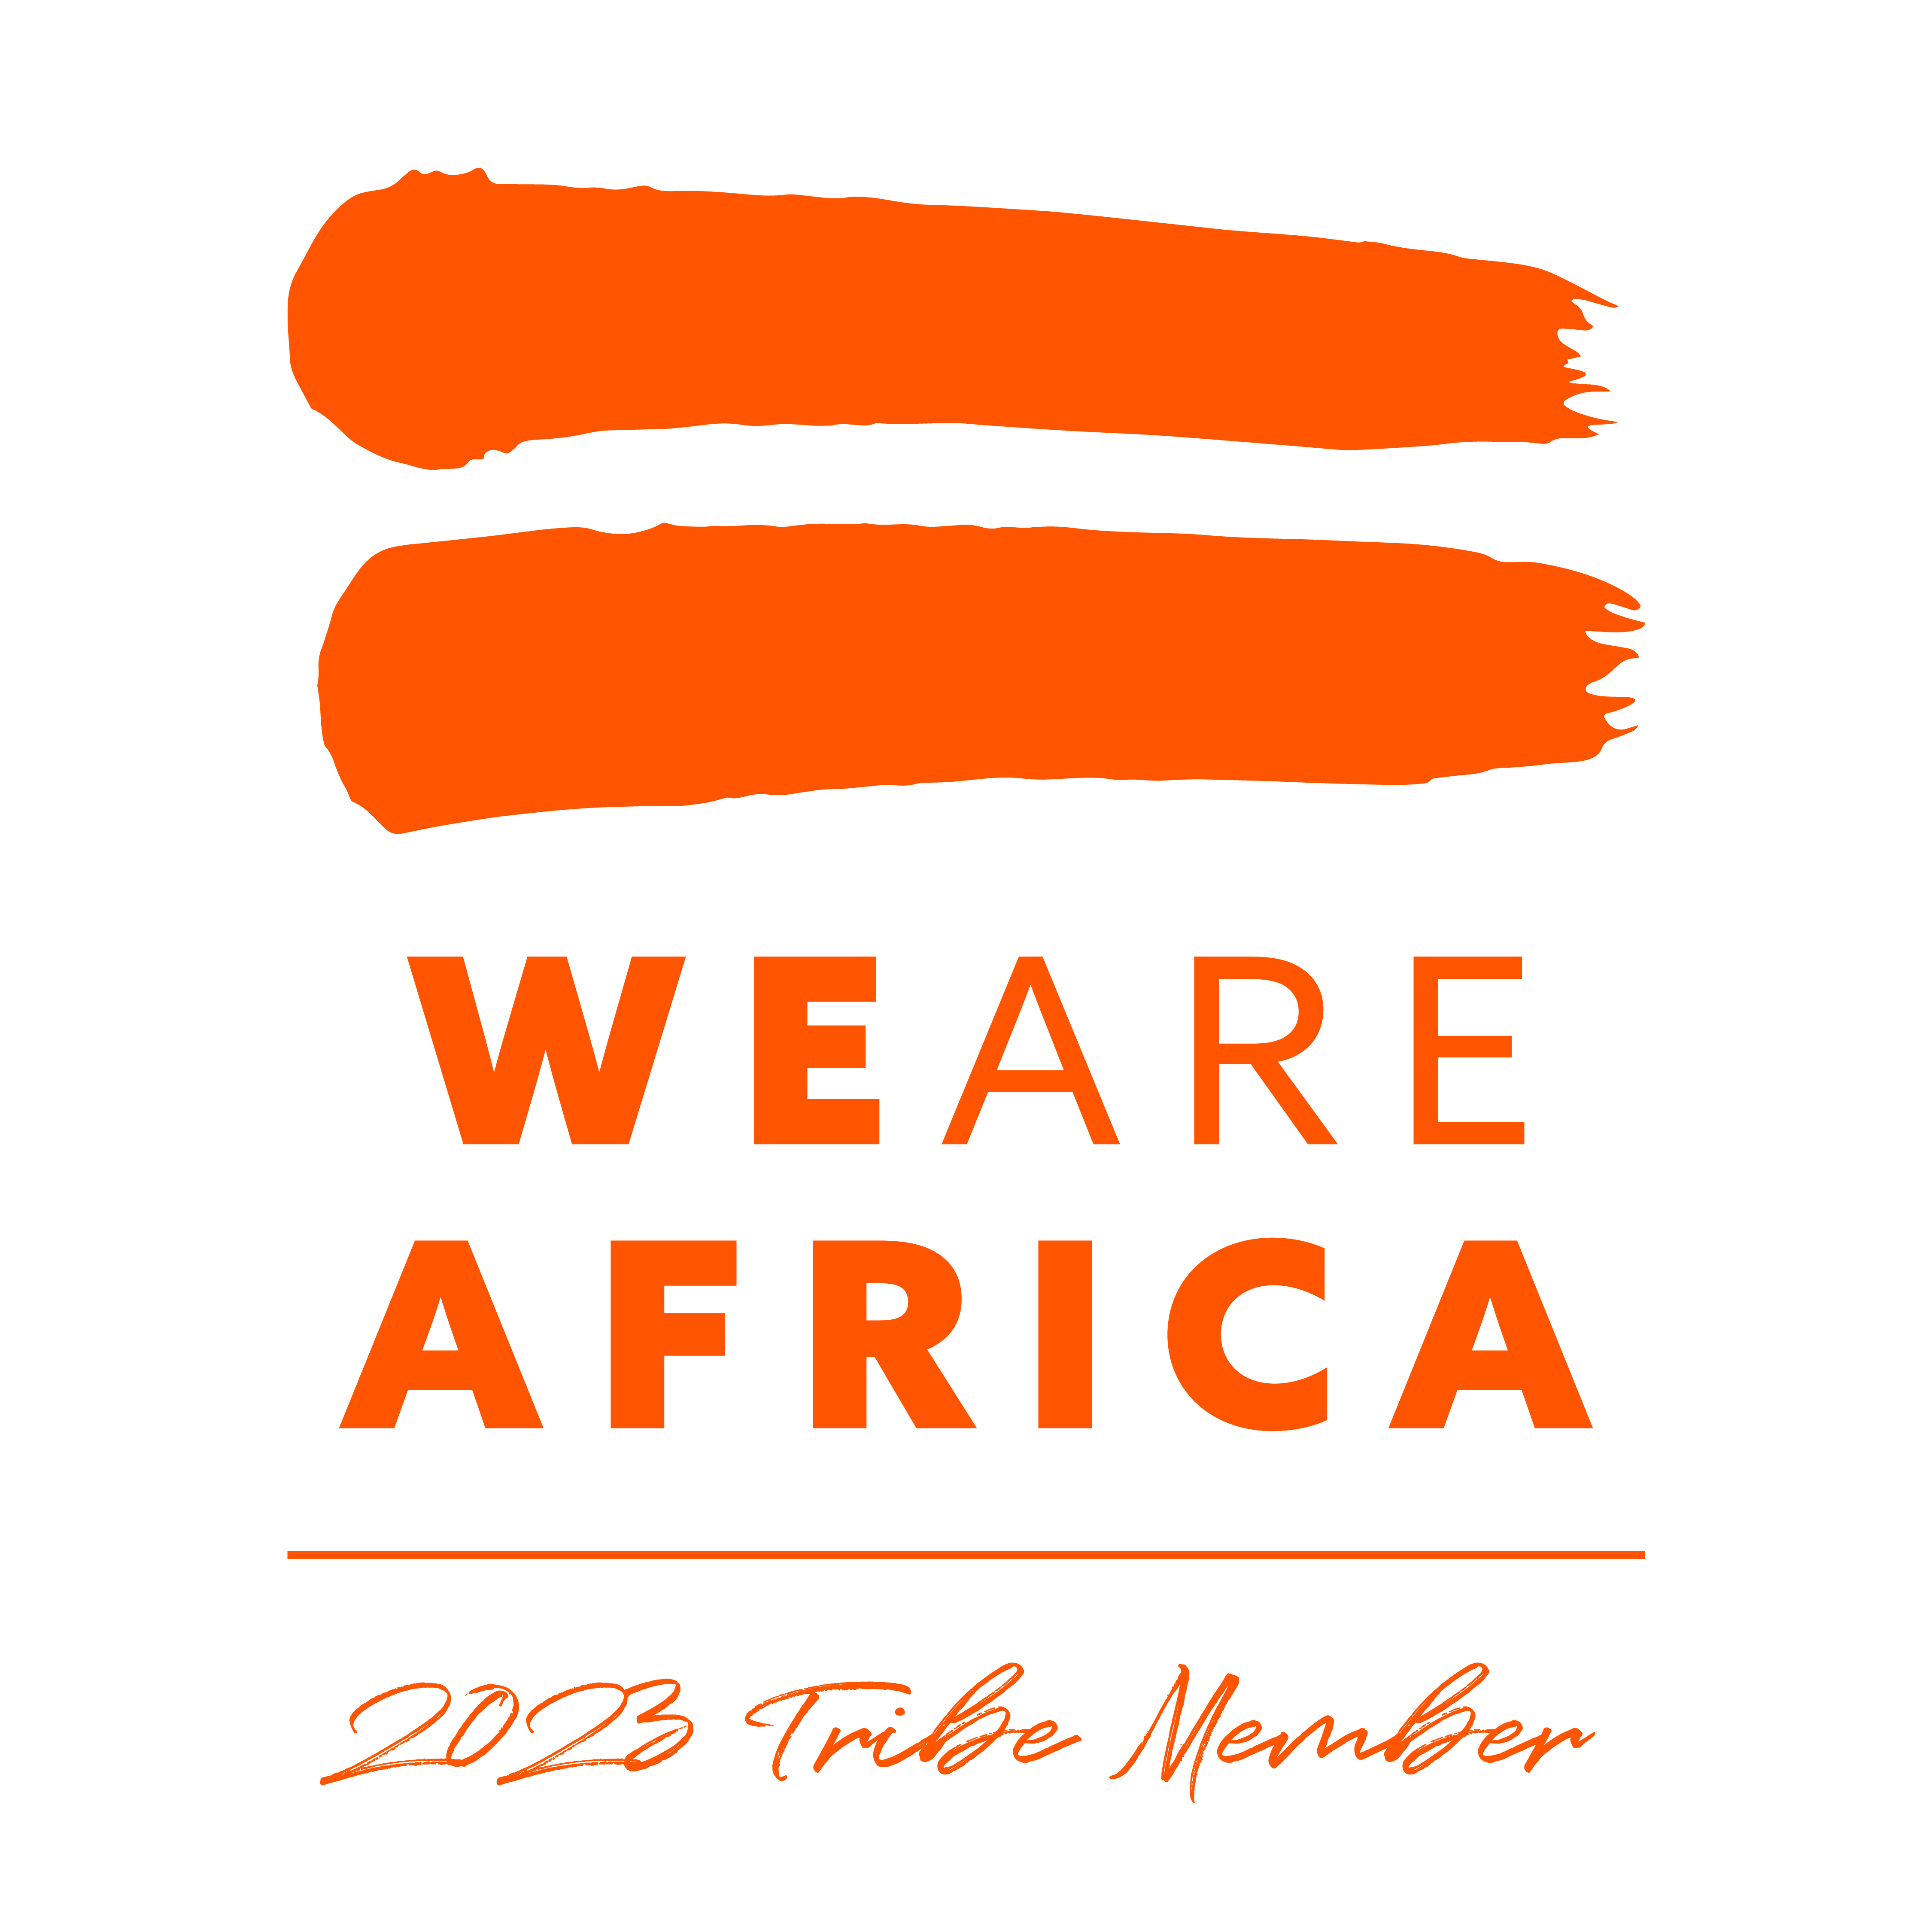 We are Africa logo